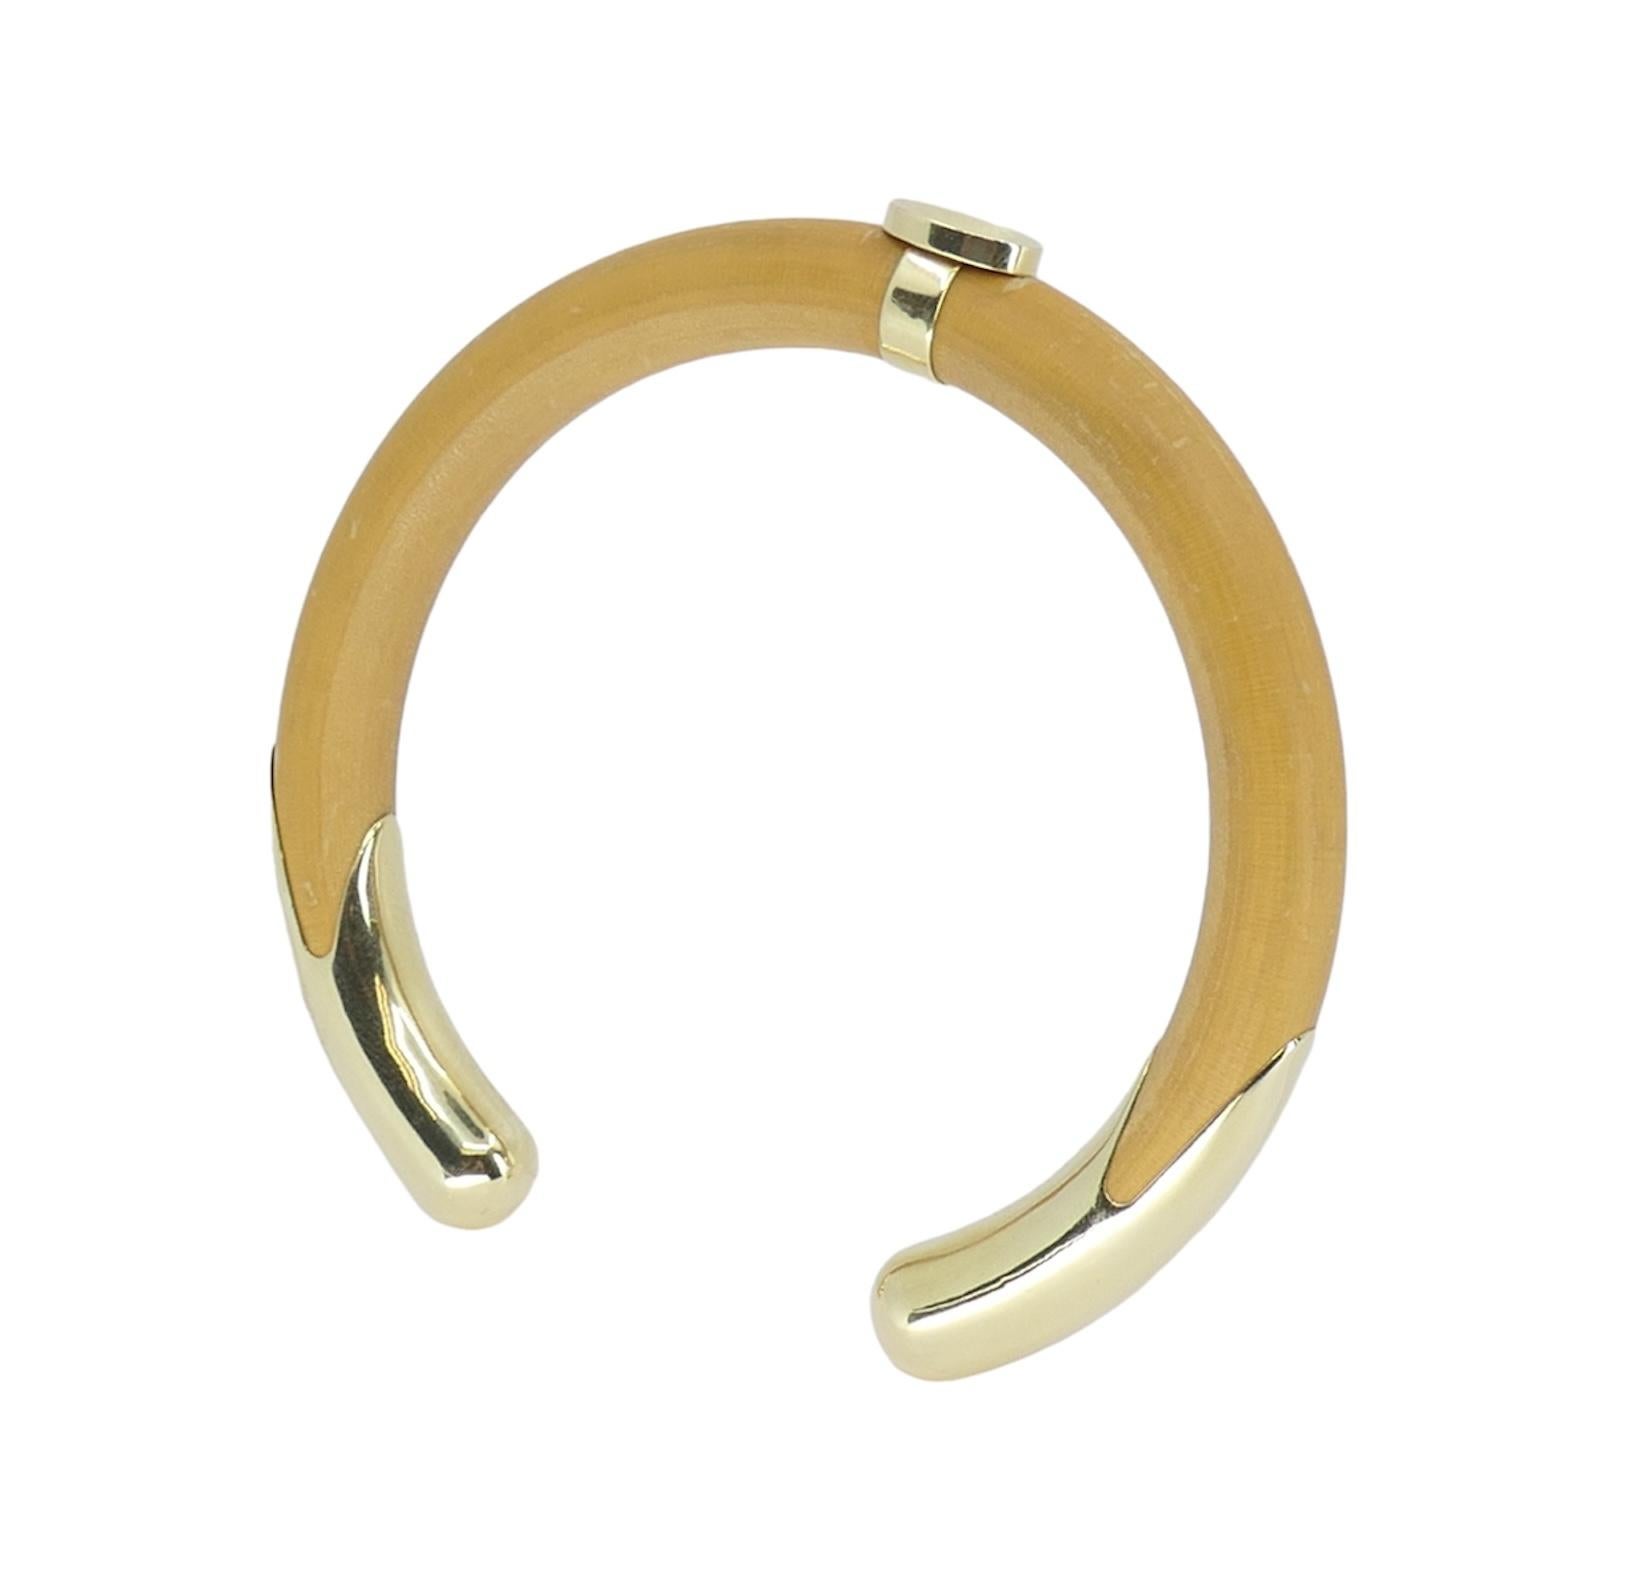 Vintage Elsa Peretti For Tiffany & Co. Bamboo 18k Gold Cuff Bracelet For Sale 1